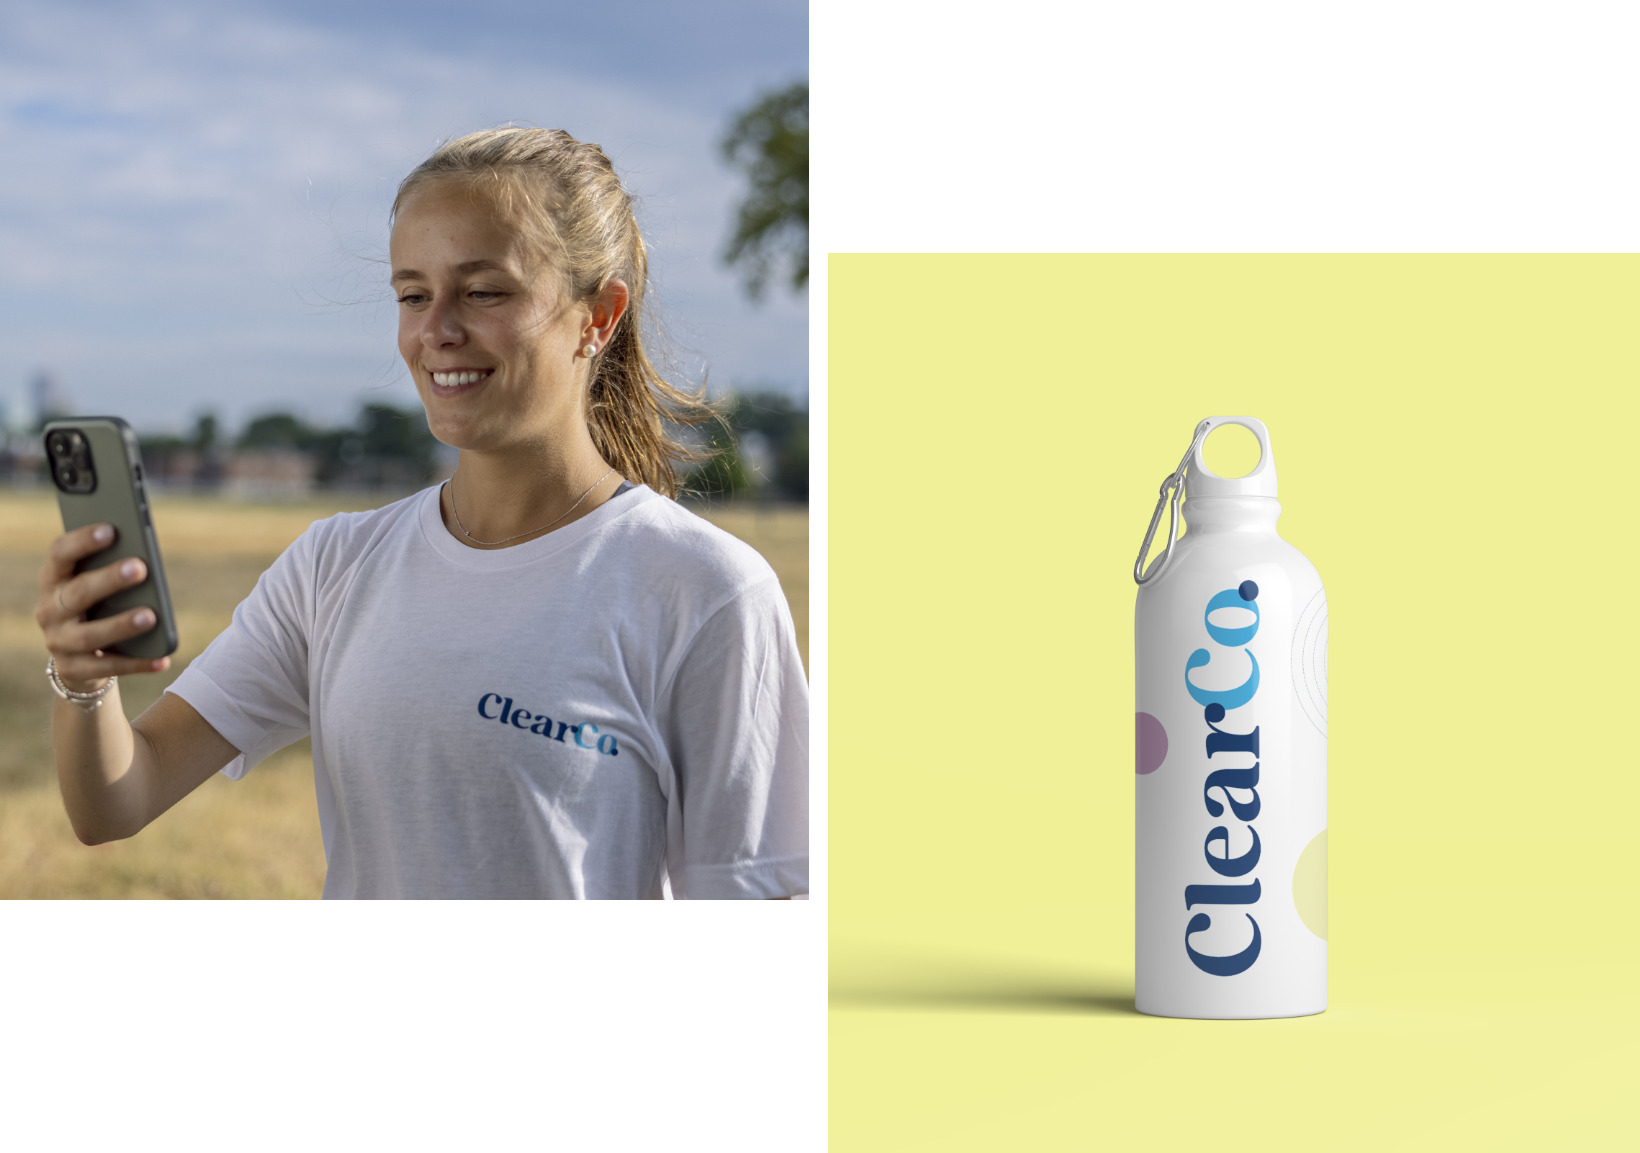 (Left) female ClearCo employee wearing ClearCo tshirt. (Right) Metal water bottle with ClearCo brand Logo on it.